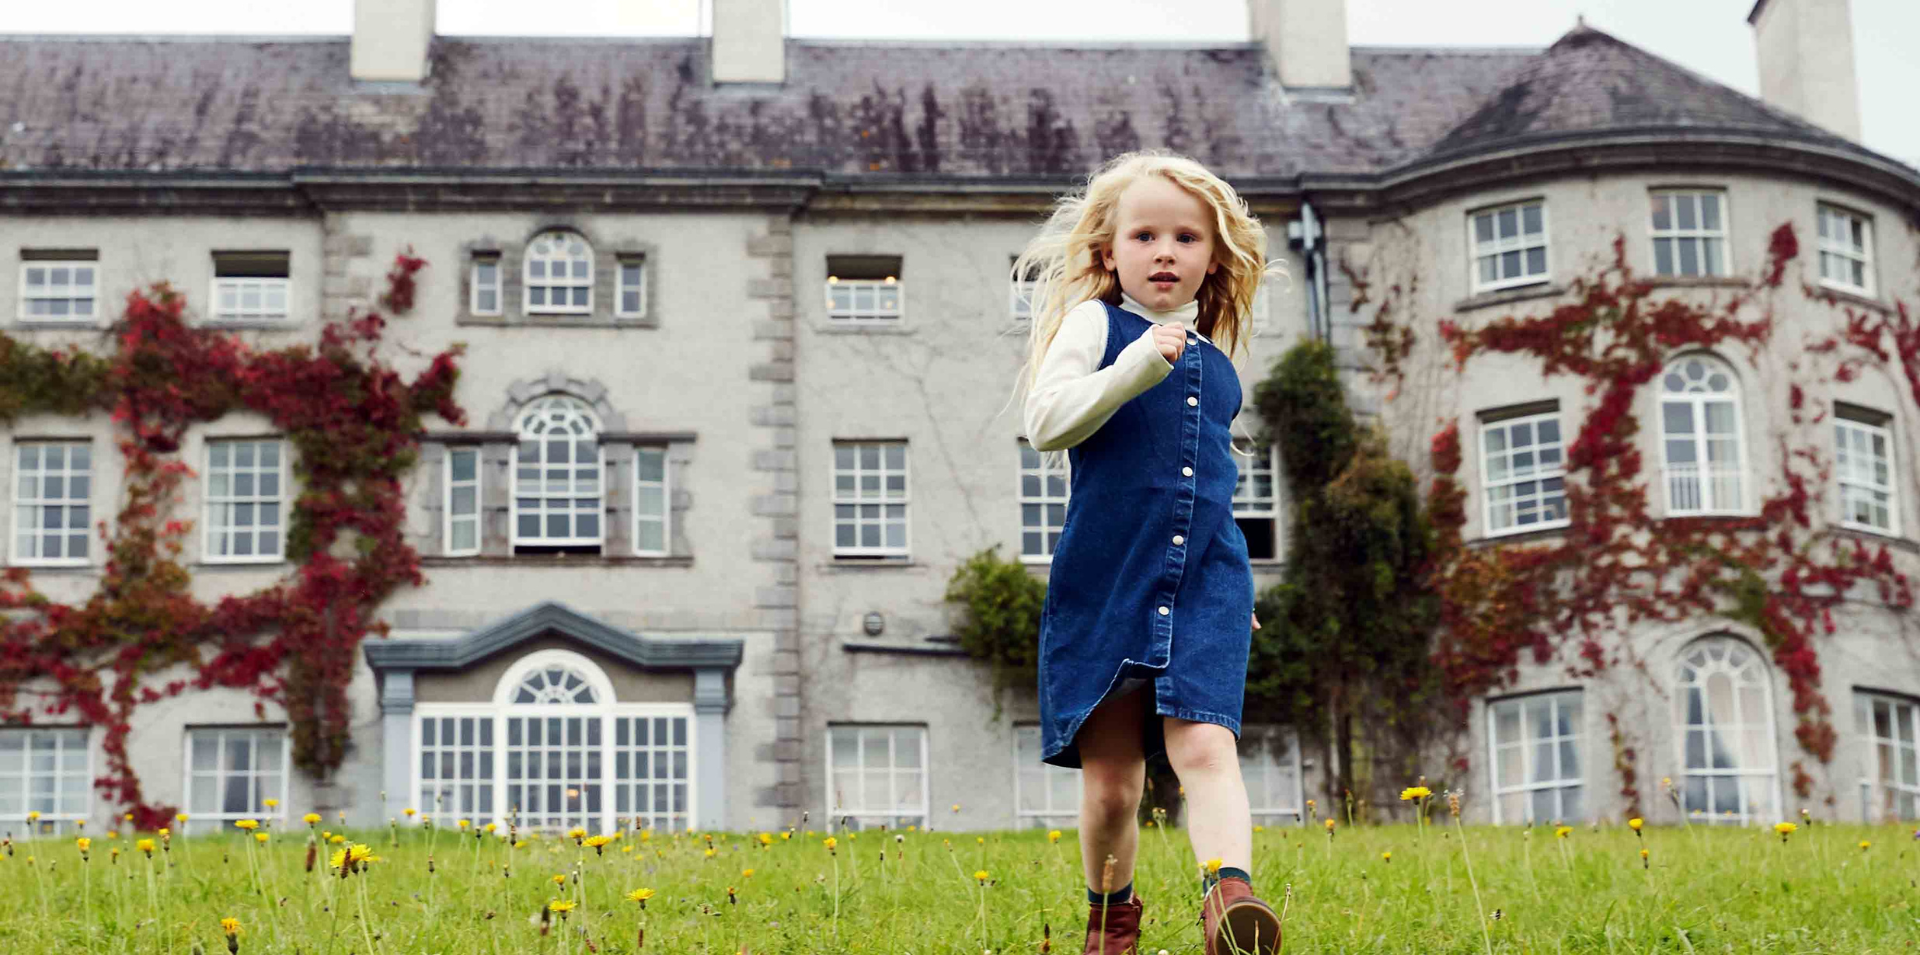 3 Night Summer Family Break- with Dinner on One Night and Access to Junior Club (including kids meals) from €469 per night